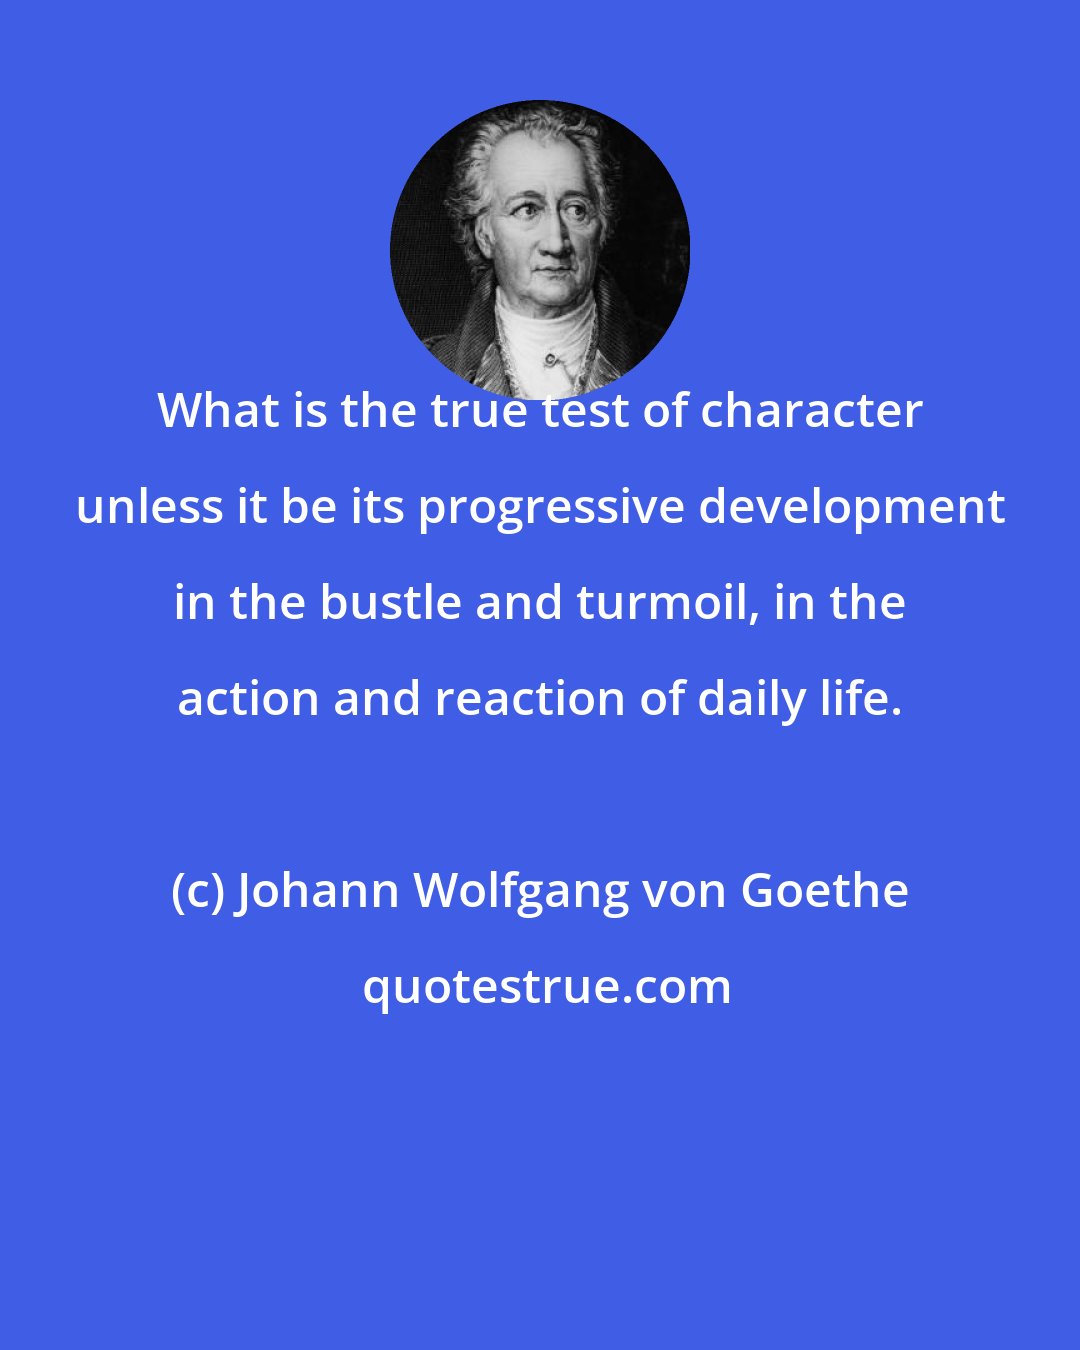 Johann Wolfgang von Goethe: What is the true test of character unless it be its progressive development in the bustle and turmoil, in the action and reaction of daily life.